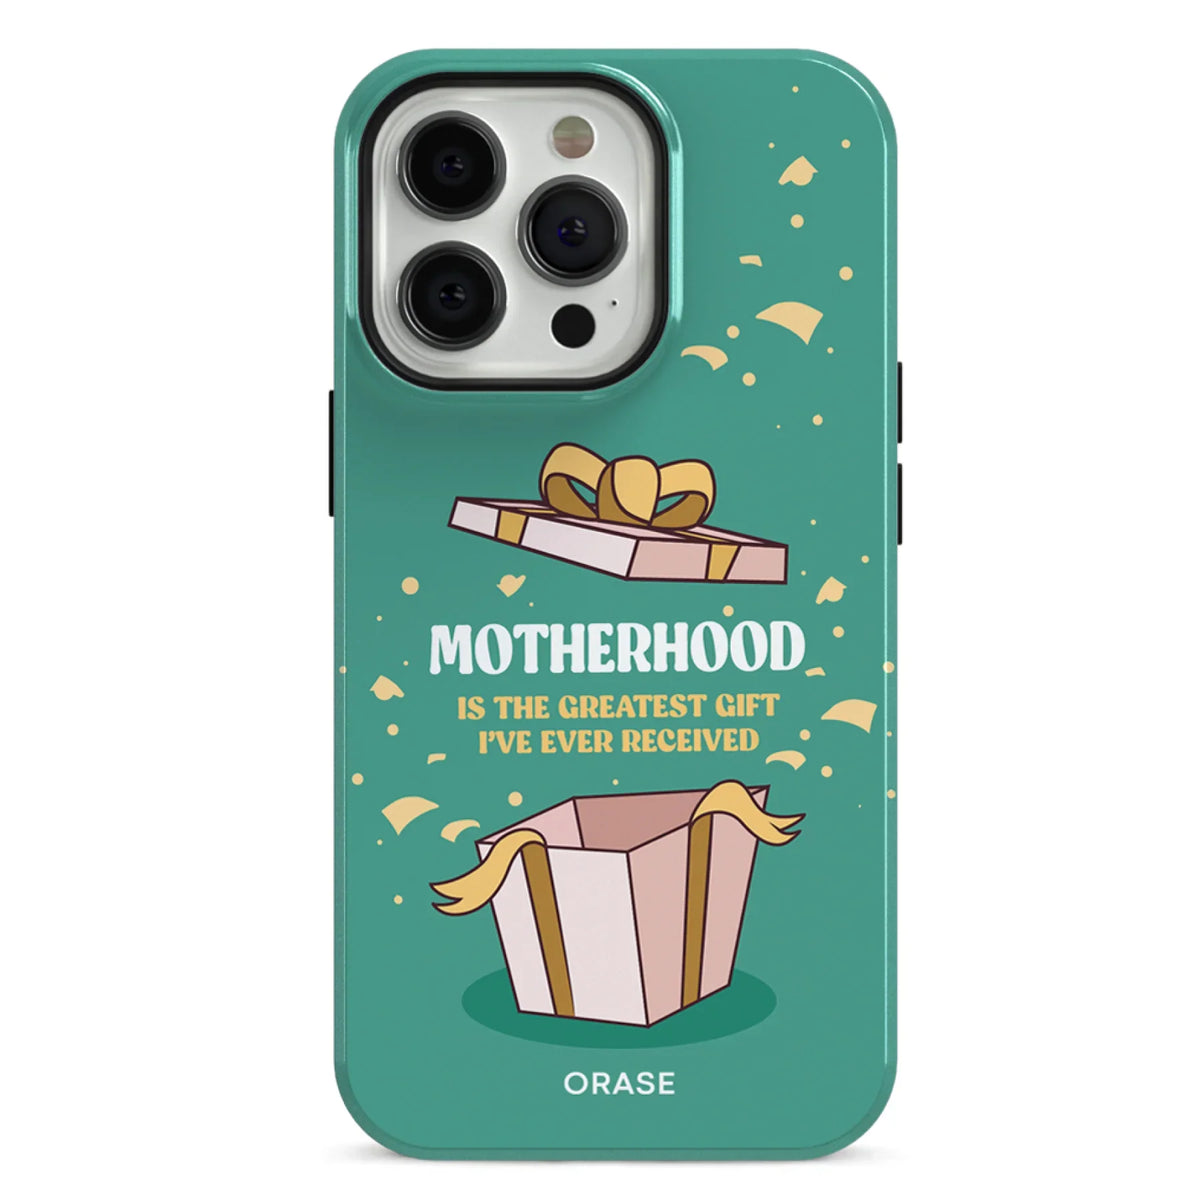 Motherhood Is The Greatest Gift iPhone Case - iPhone 12